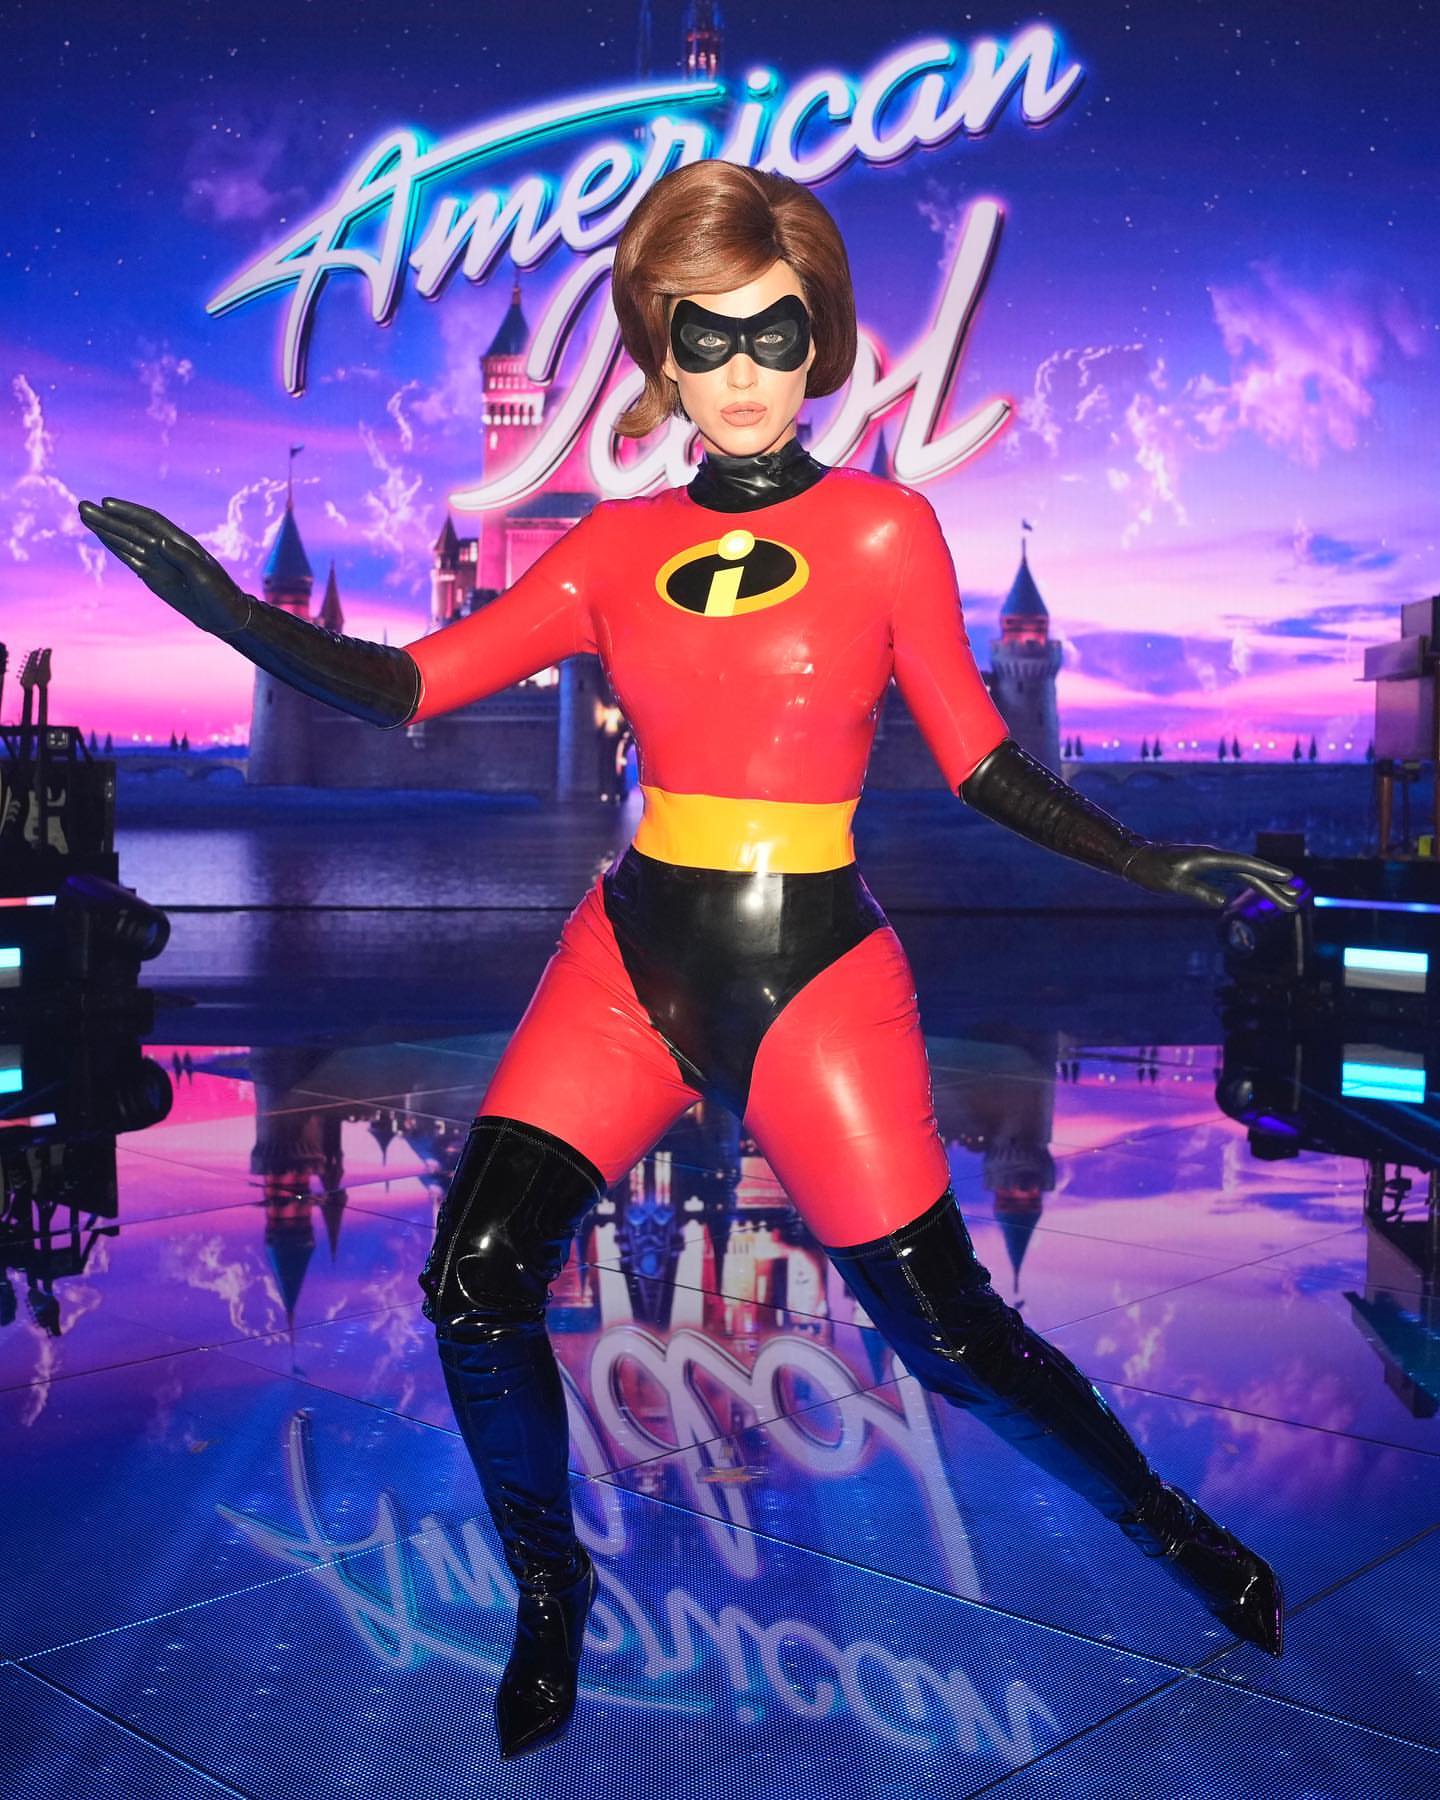 Photos n°3 : Katy Perry in Incredibles Cosplay for the Nerds!